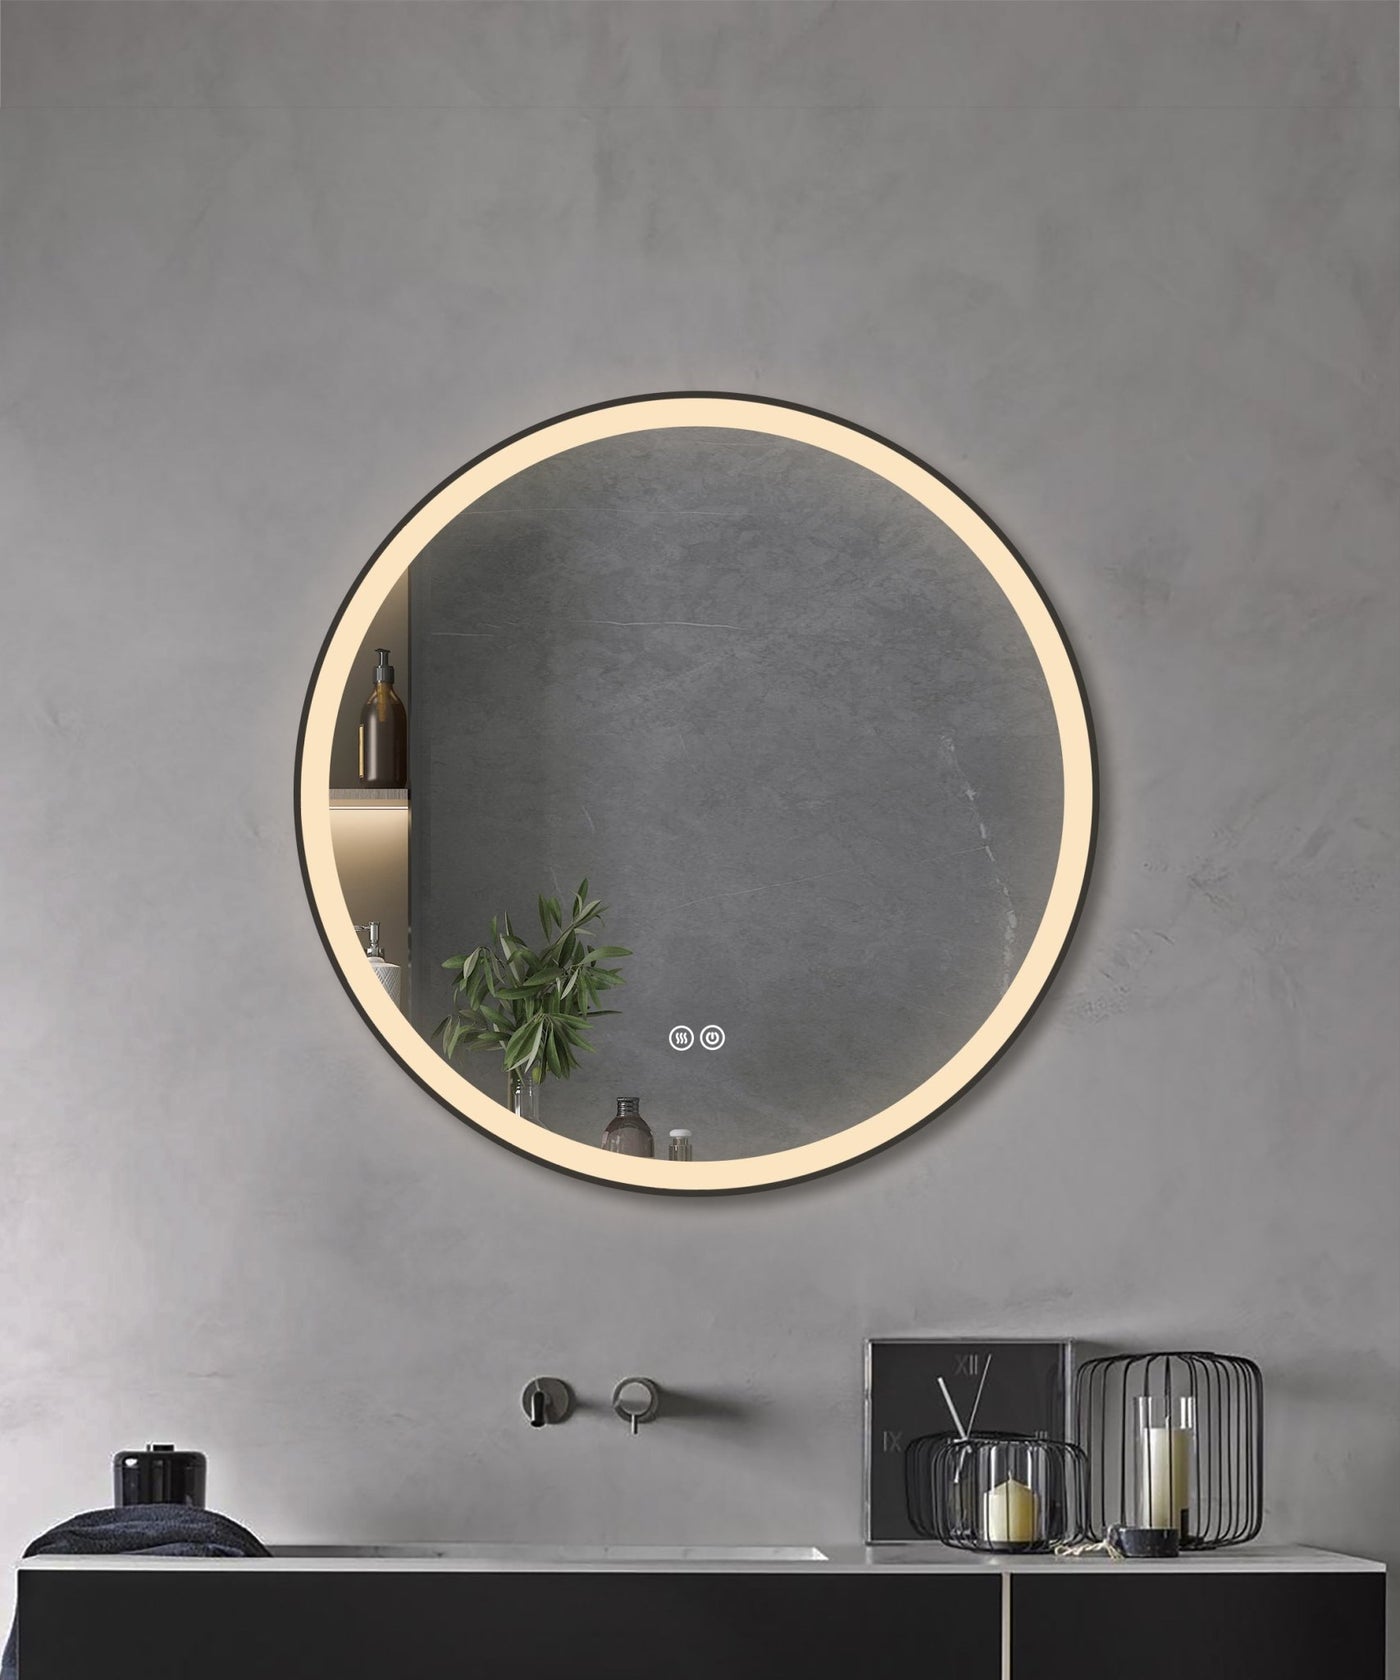 Black Framed Round LED Mirror with a Demister, Three Colour Selections, And A Convenient Dimmer